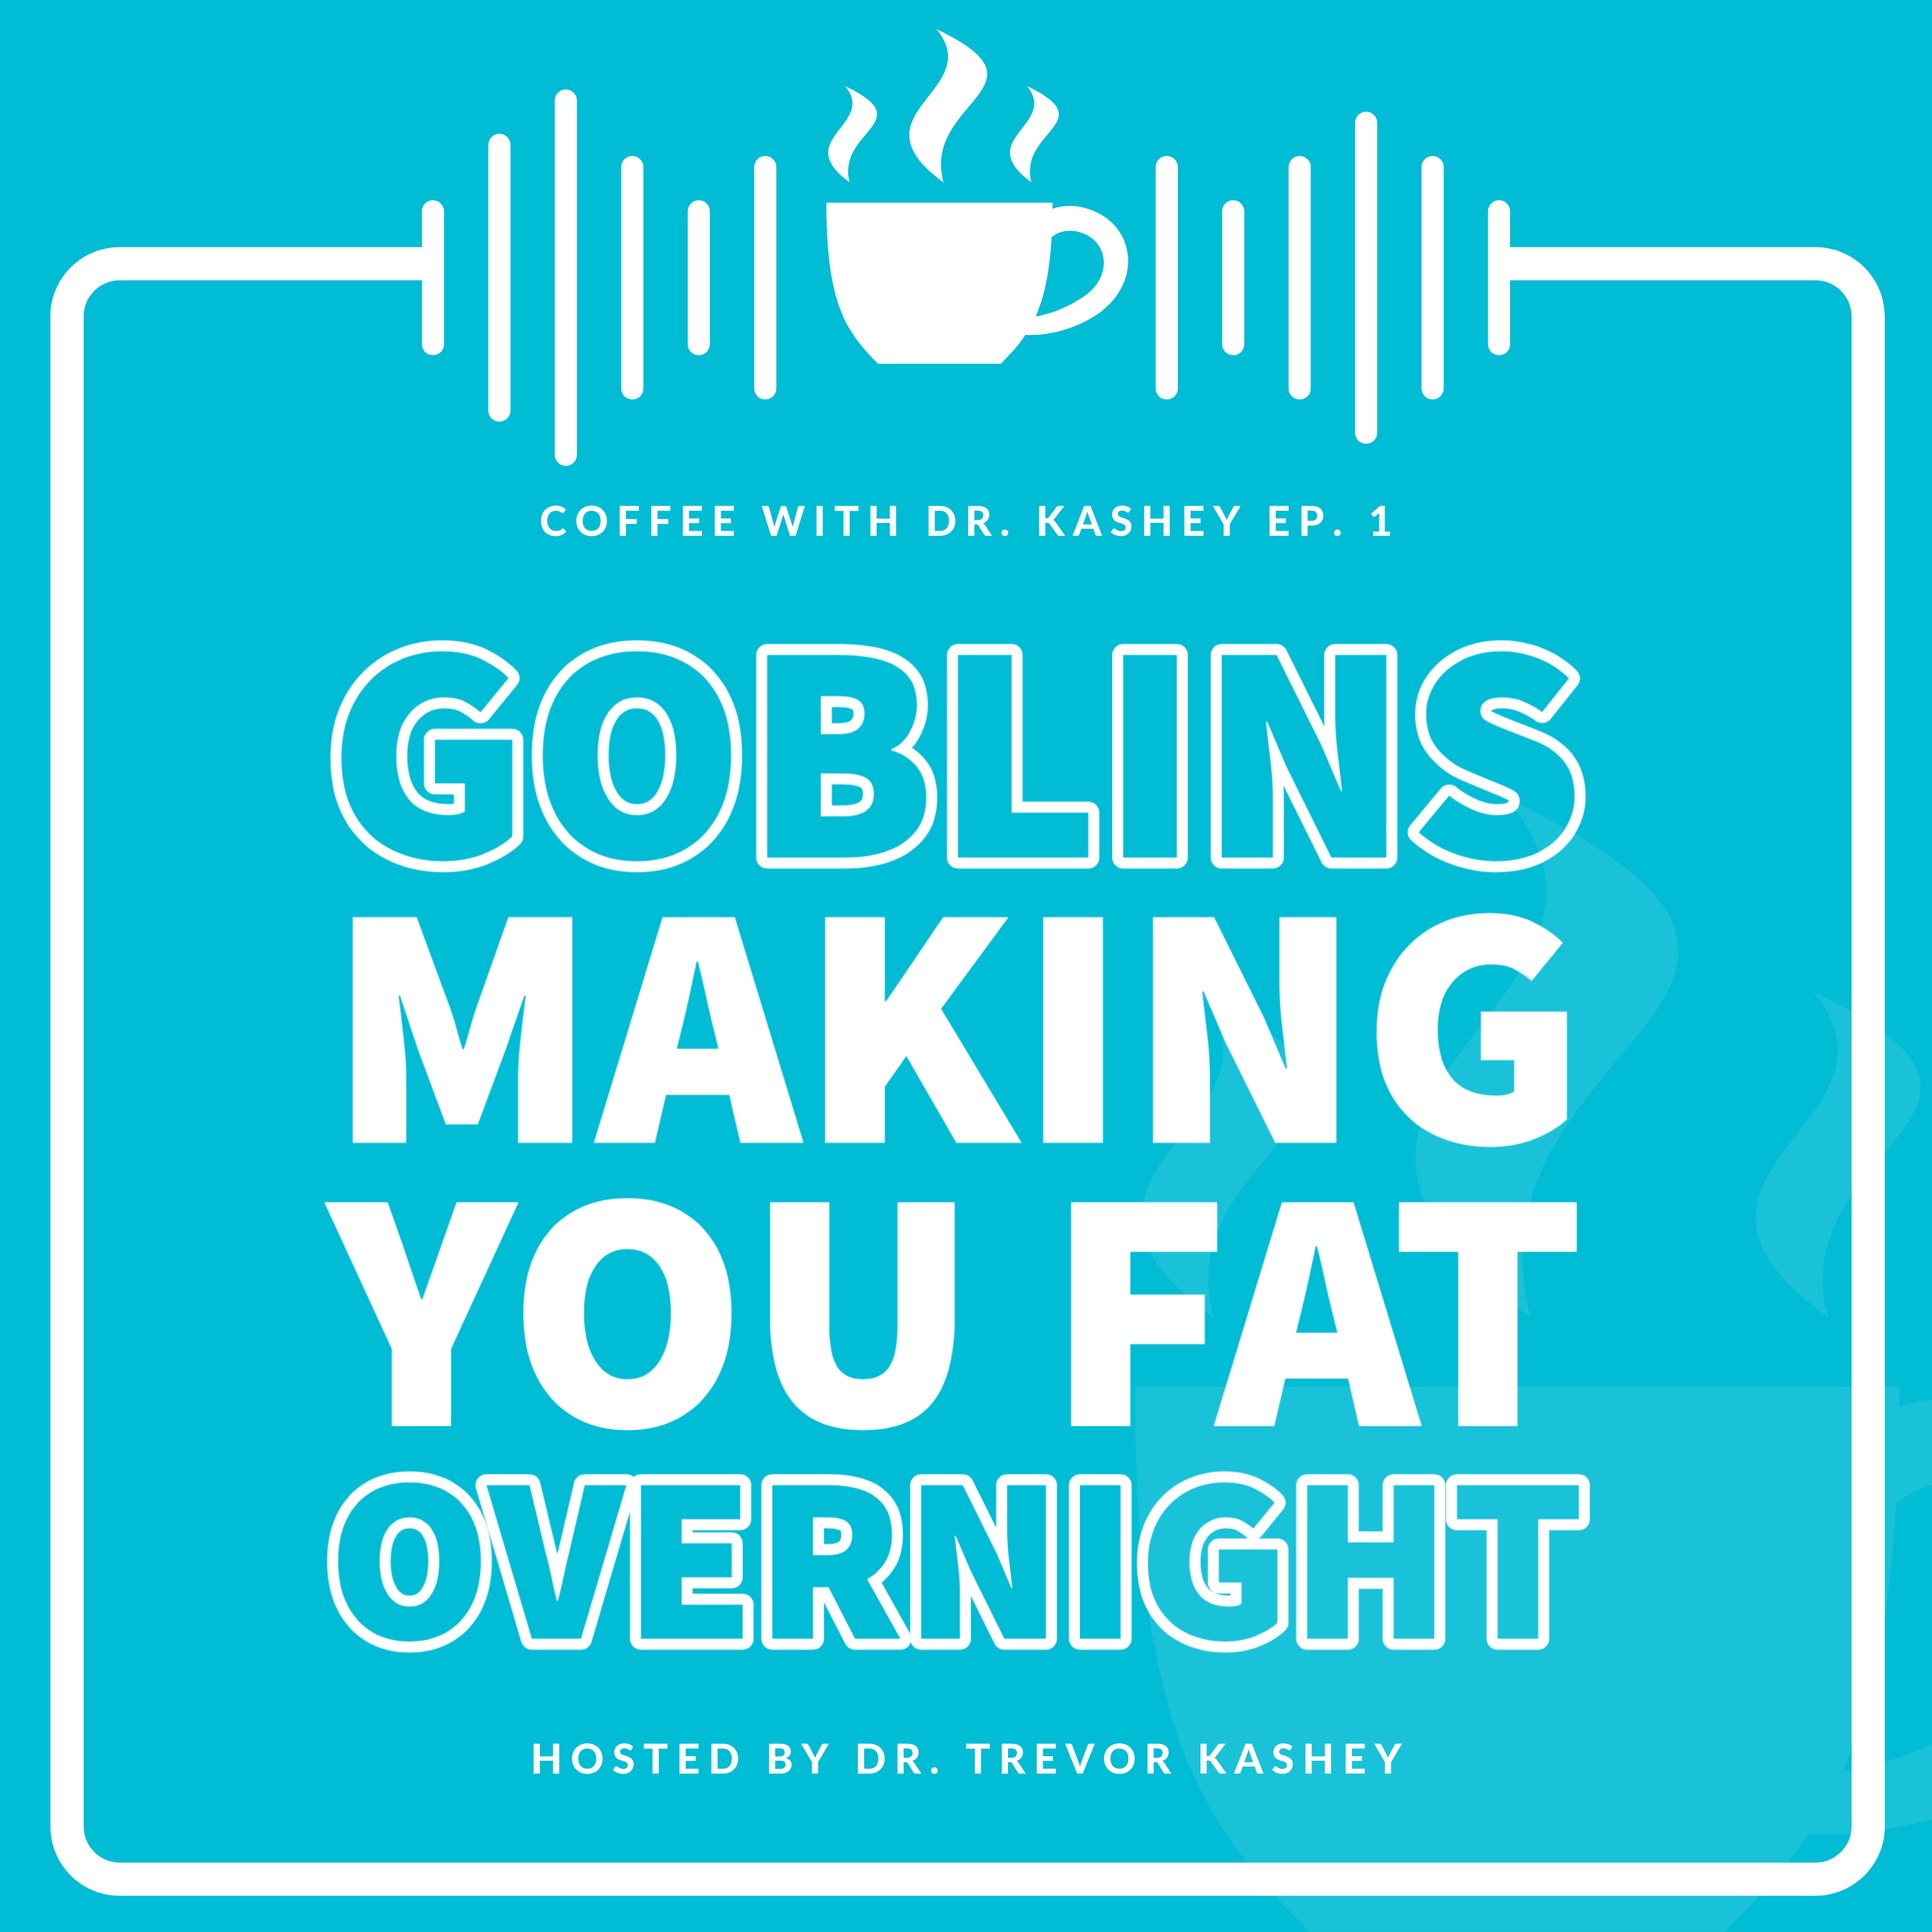 Ep #1: Goblins Making You "Fat" Overnight